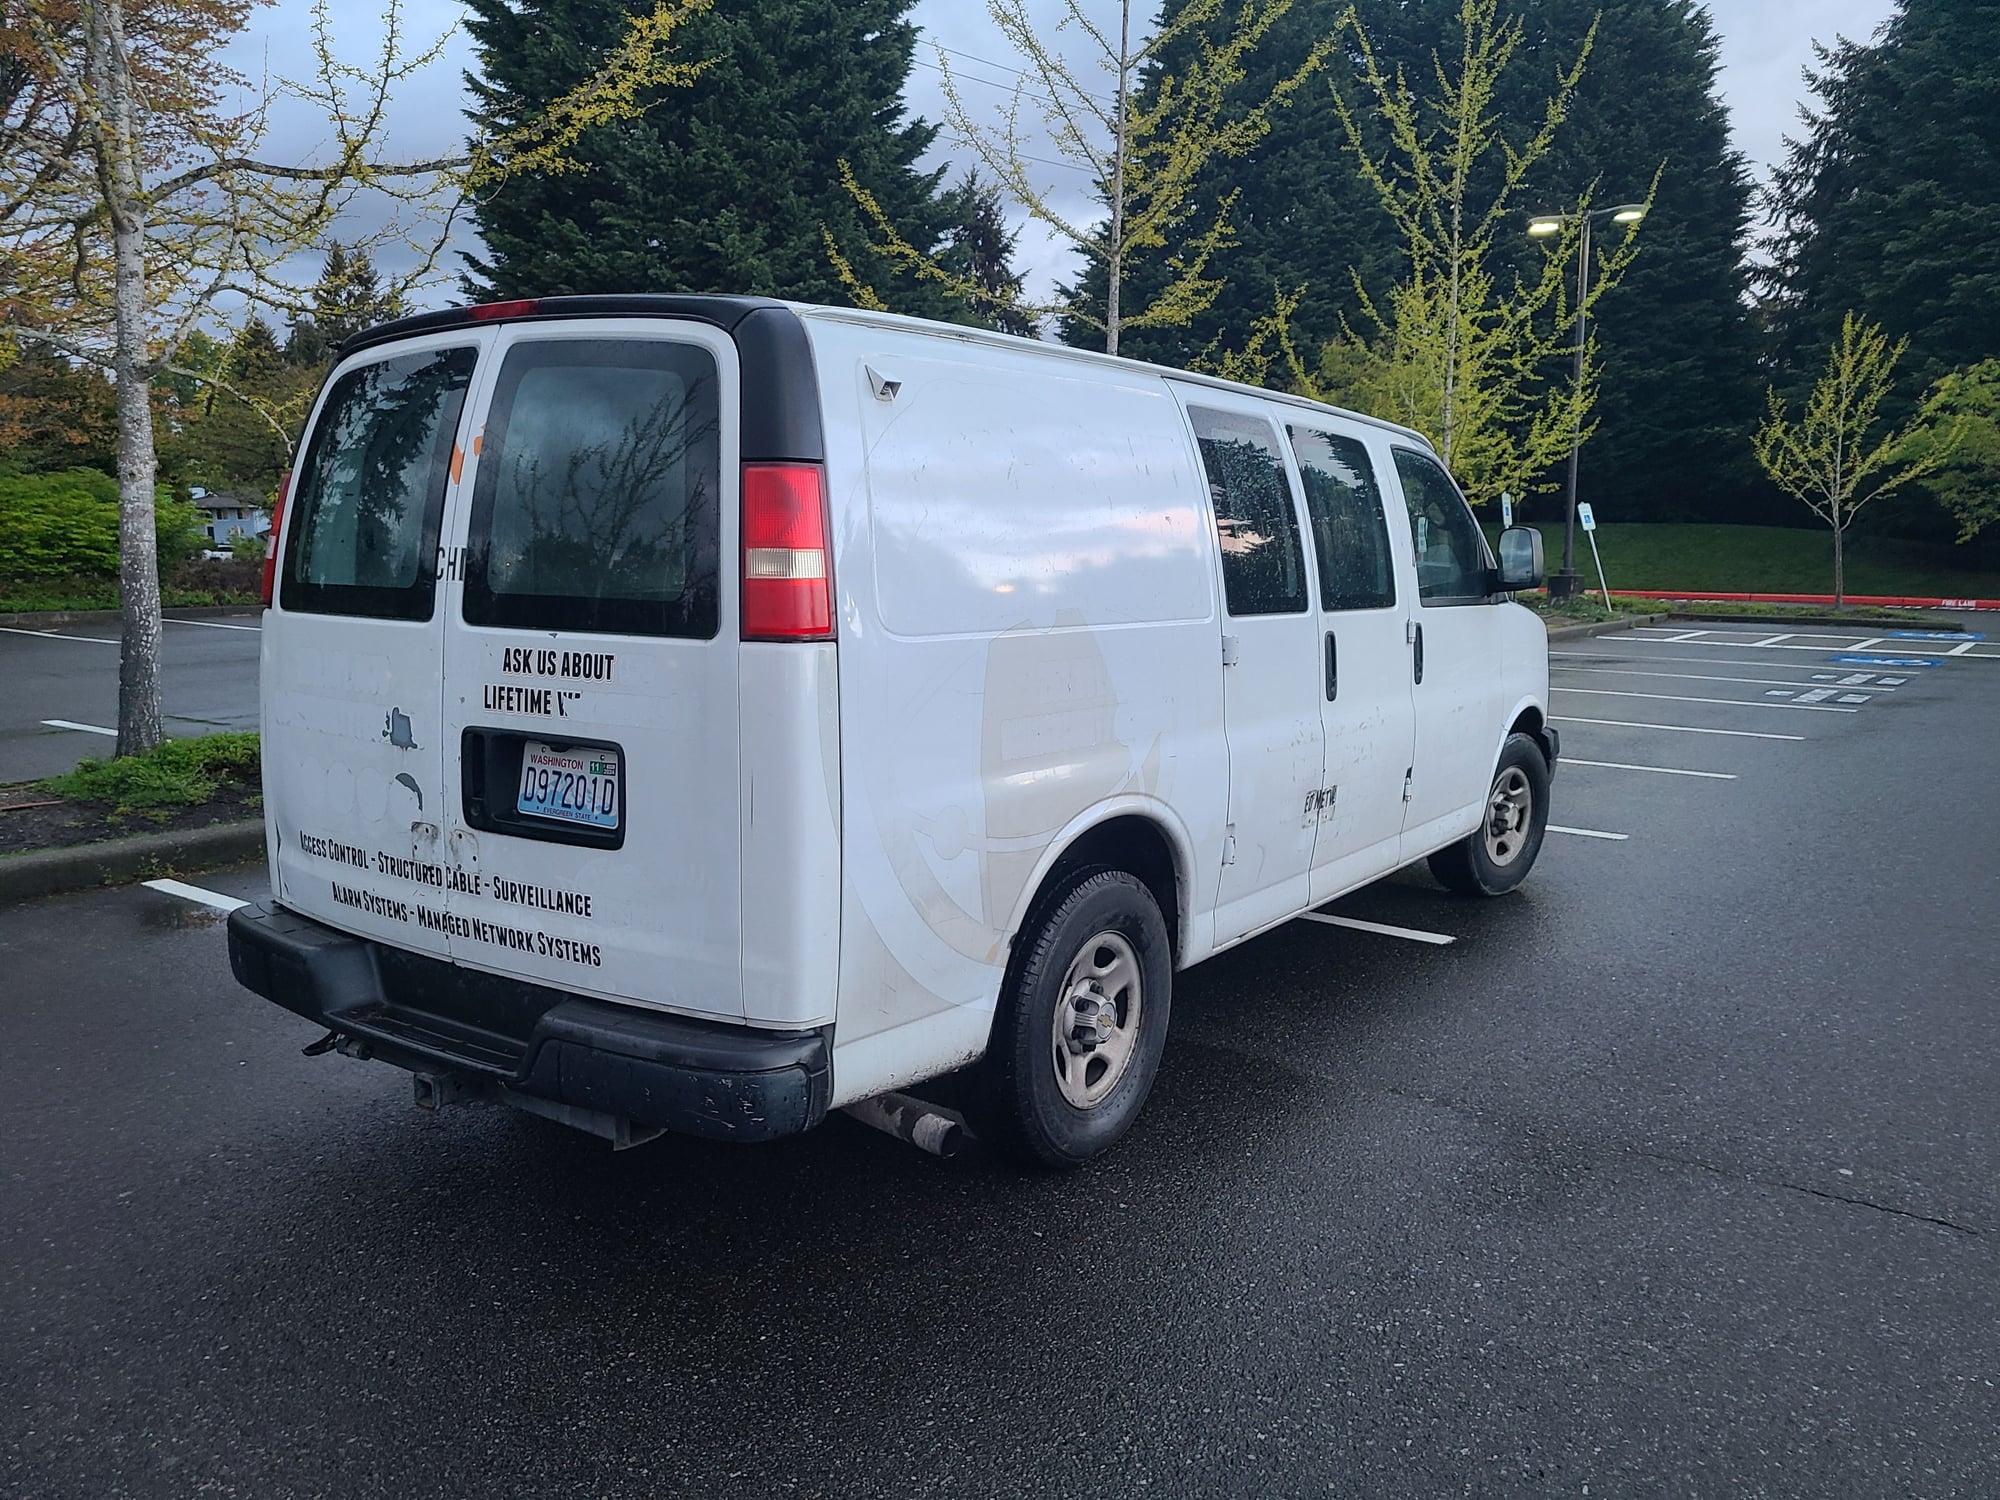 2005 Chevrolet Express 1500 - 2005 Chevrolet Express 1500 AWD Cargo - Used - VIN 1GCFH15T151179307 - 236,200 Miles - 8 cyl - AWD - Automatic - Van - White - Bellevue, WA 98008, United States